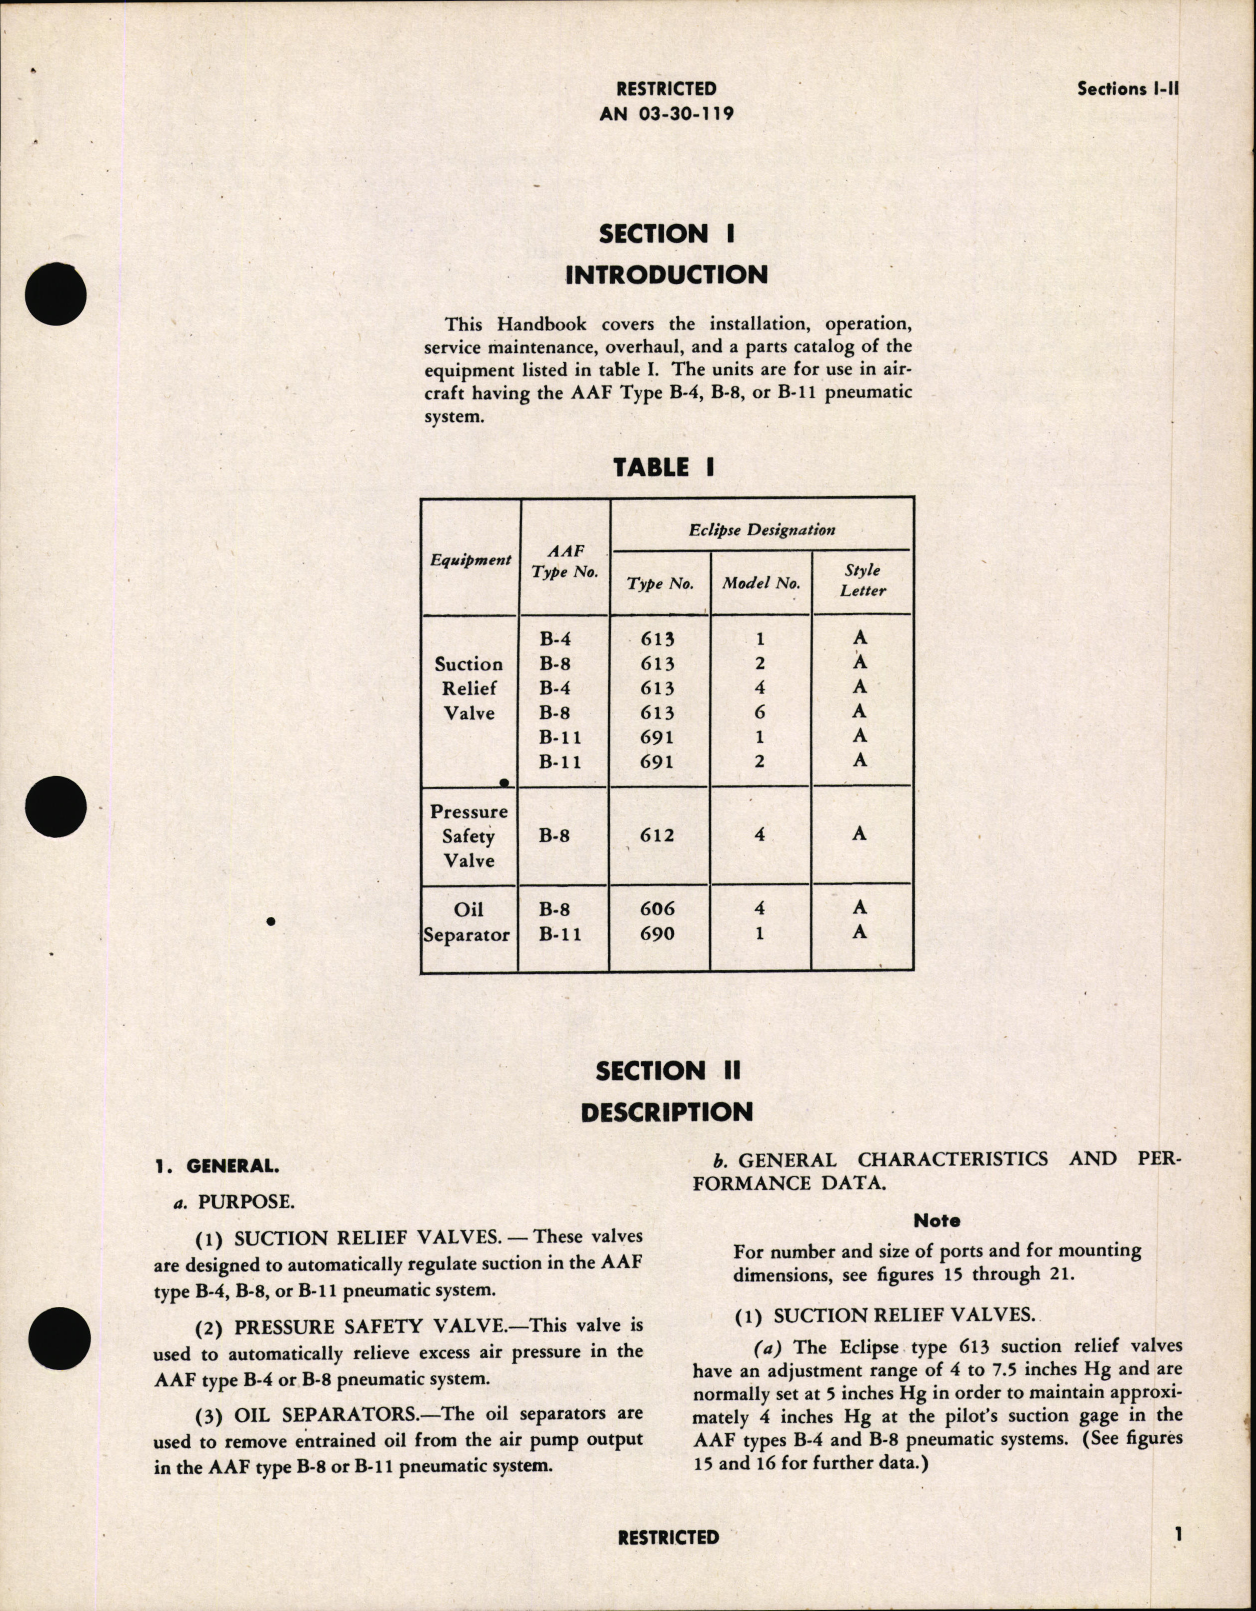 Sample page 7 from AirCorps Library document: Handbook of Instructions with Parts Catalog for Pneumatic System Valves